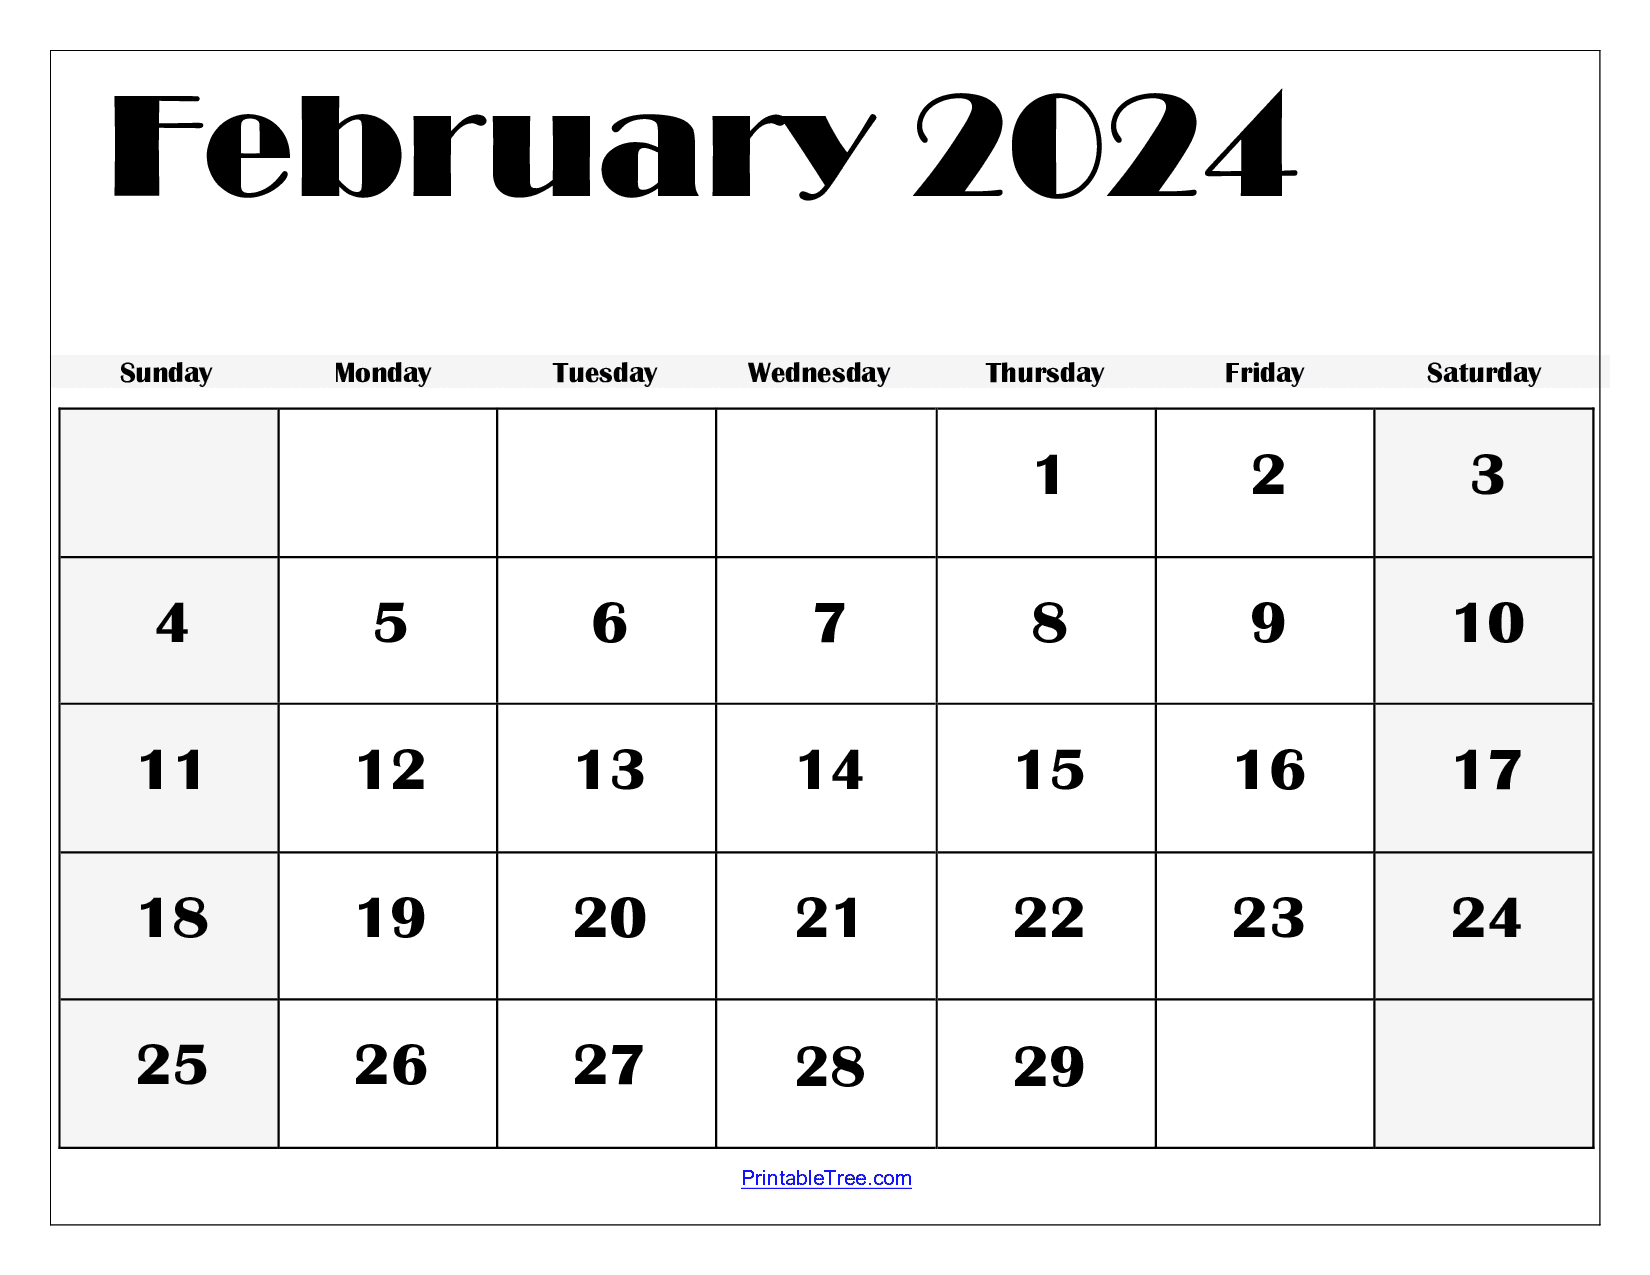 February 2024 Calendar Printable Pdf Template With Holidays intended for Feb March April 2024 Calendar Printable